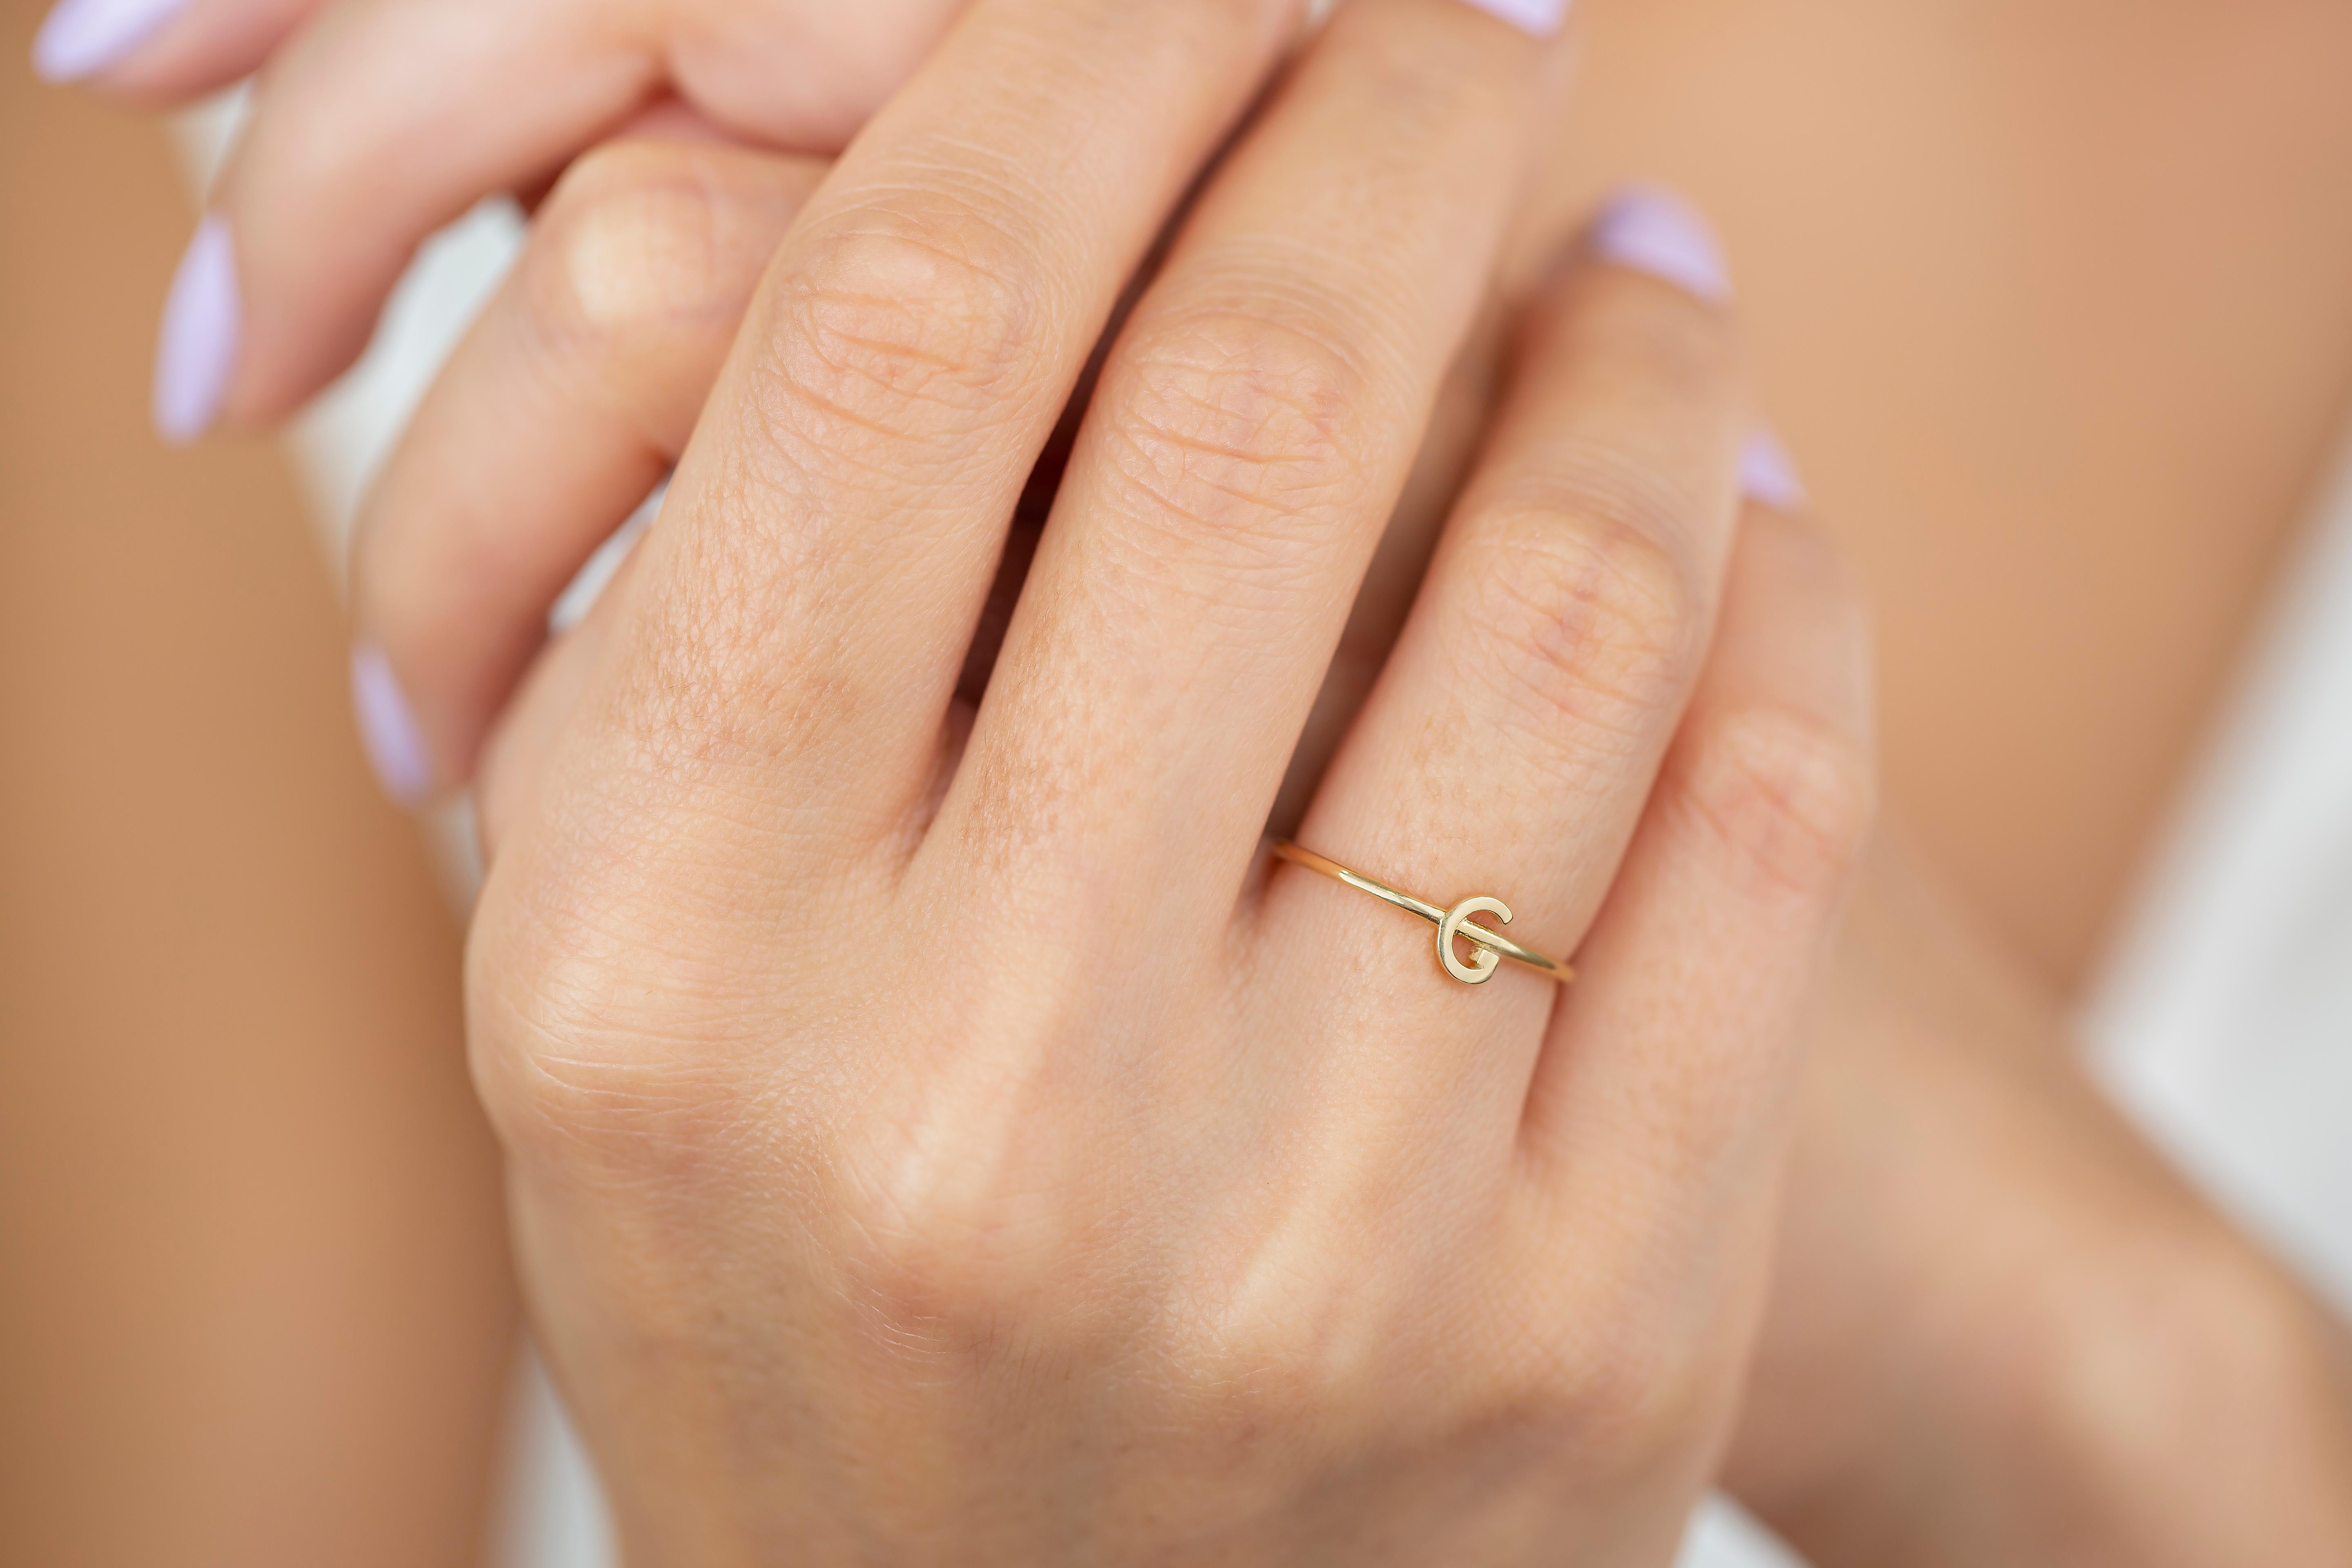 For Sale:  14K Gold Initial G Letter Ring, Personalized Initial Letter Ring 2